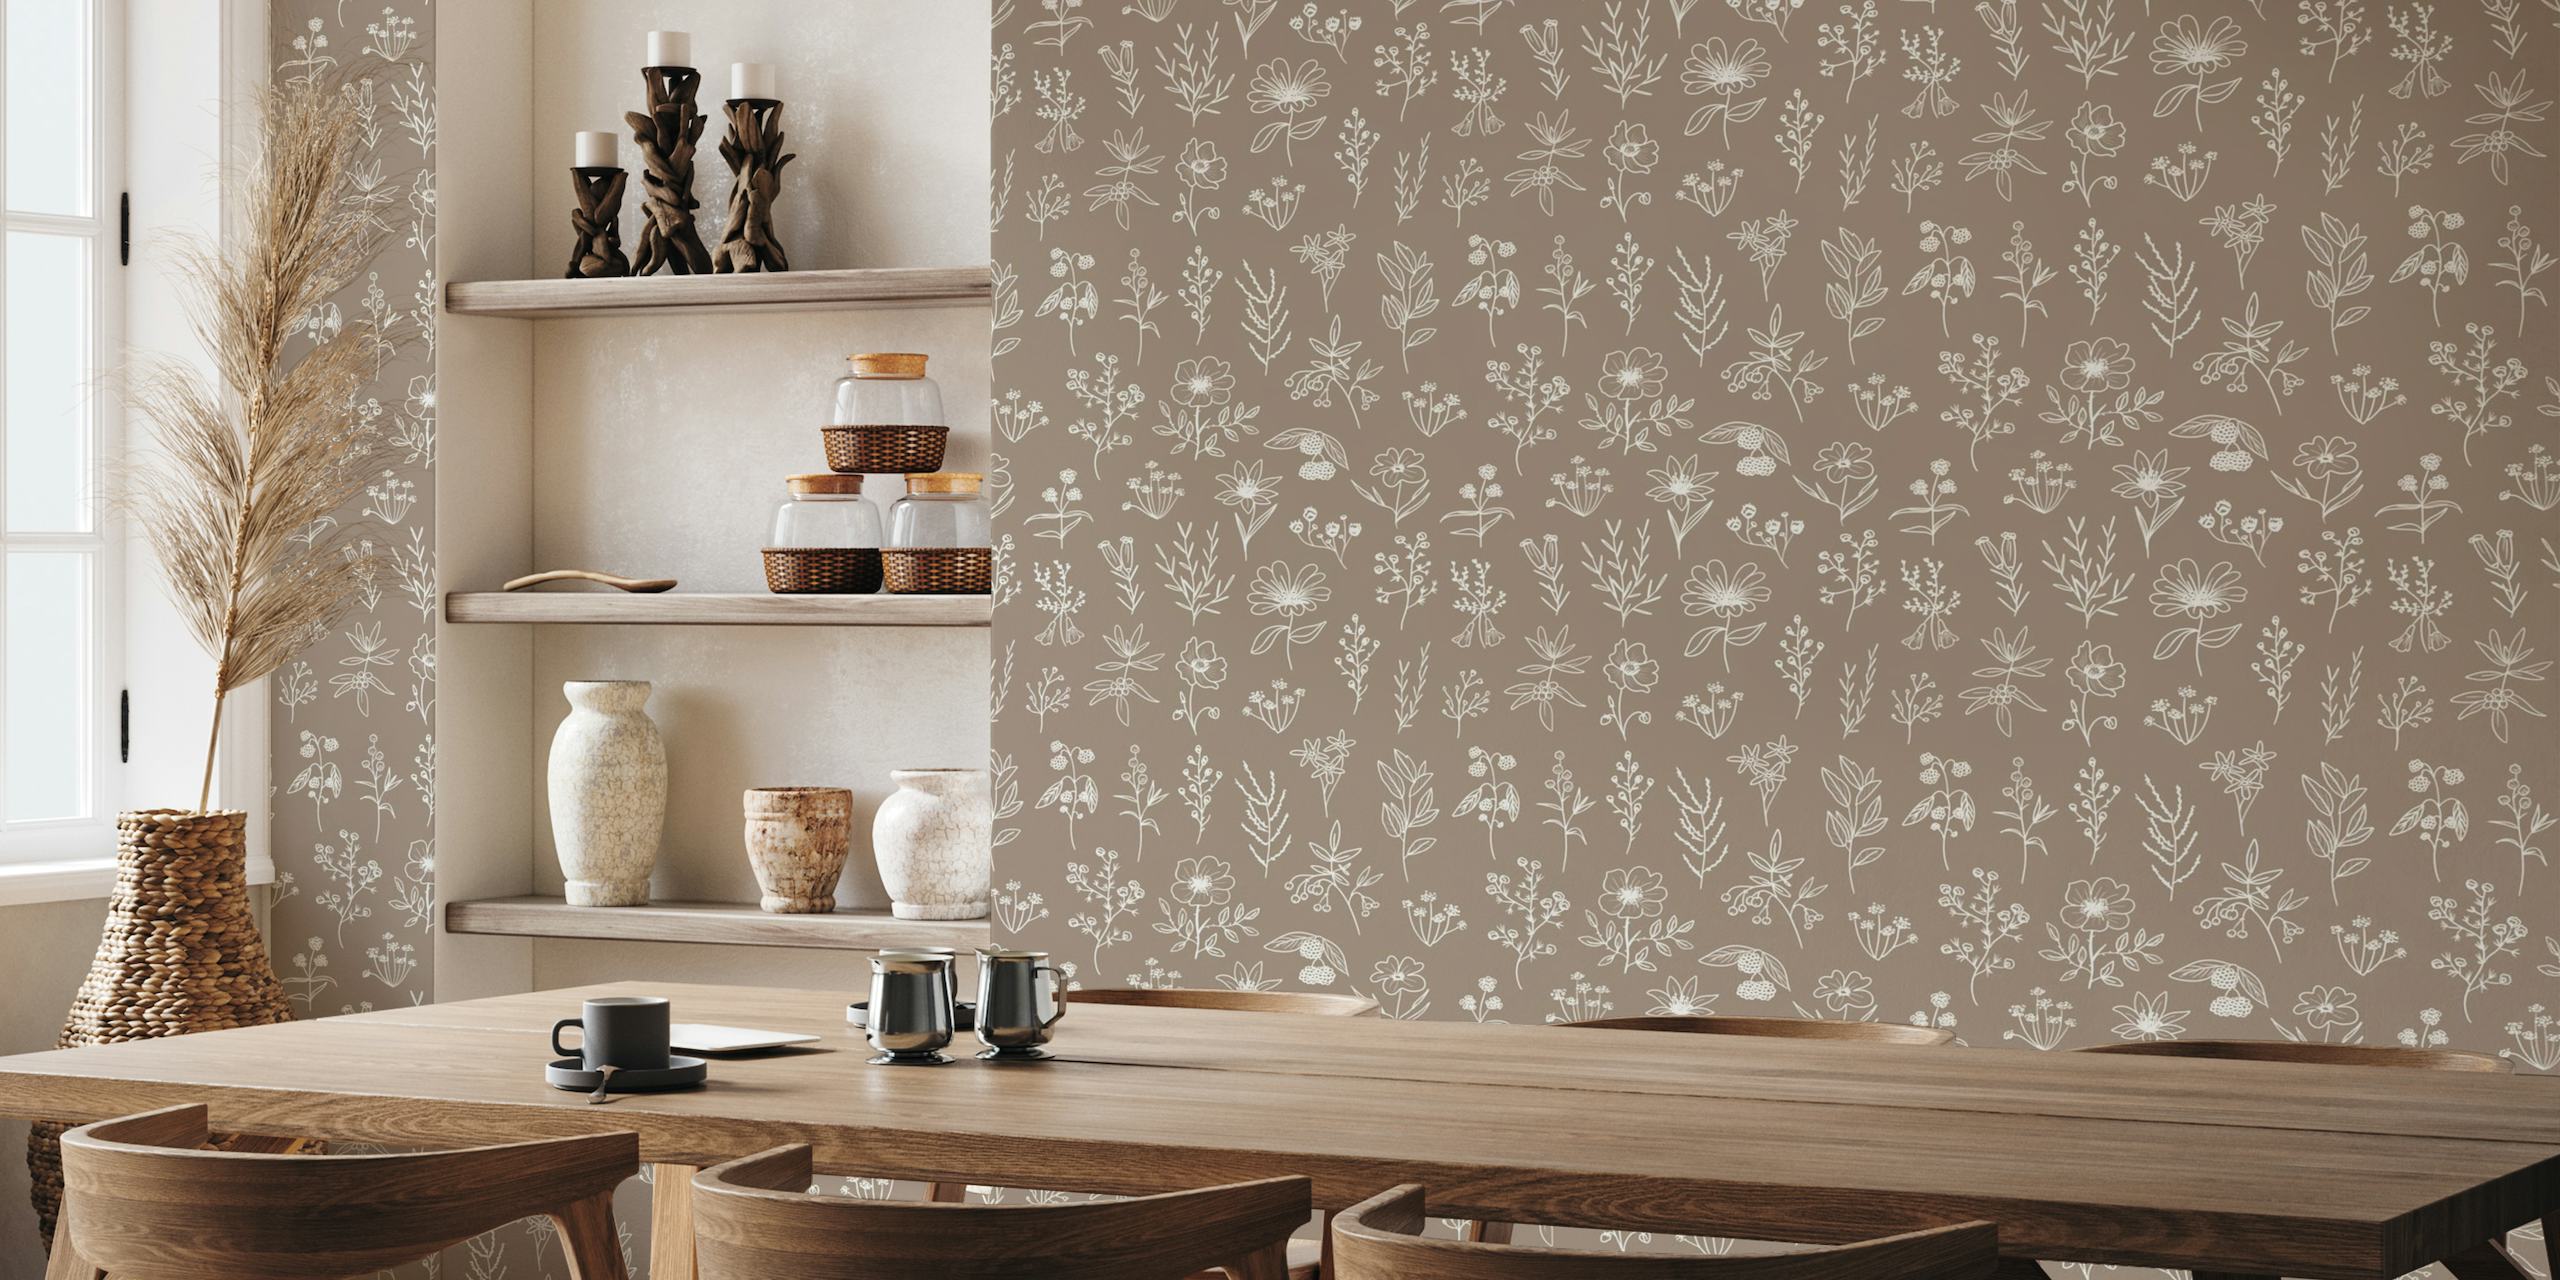 Patagonian Wildflowers Brown Wall Mural with white floral outlines on a warm brown background